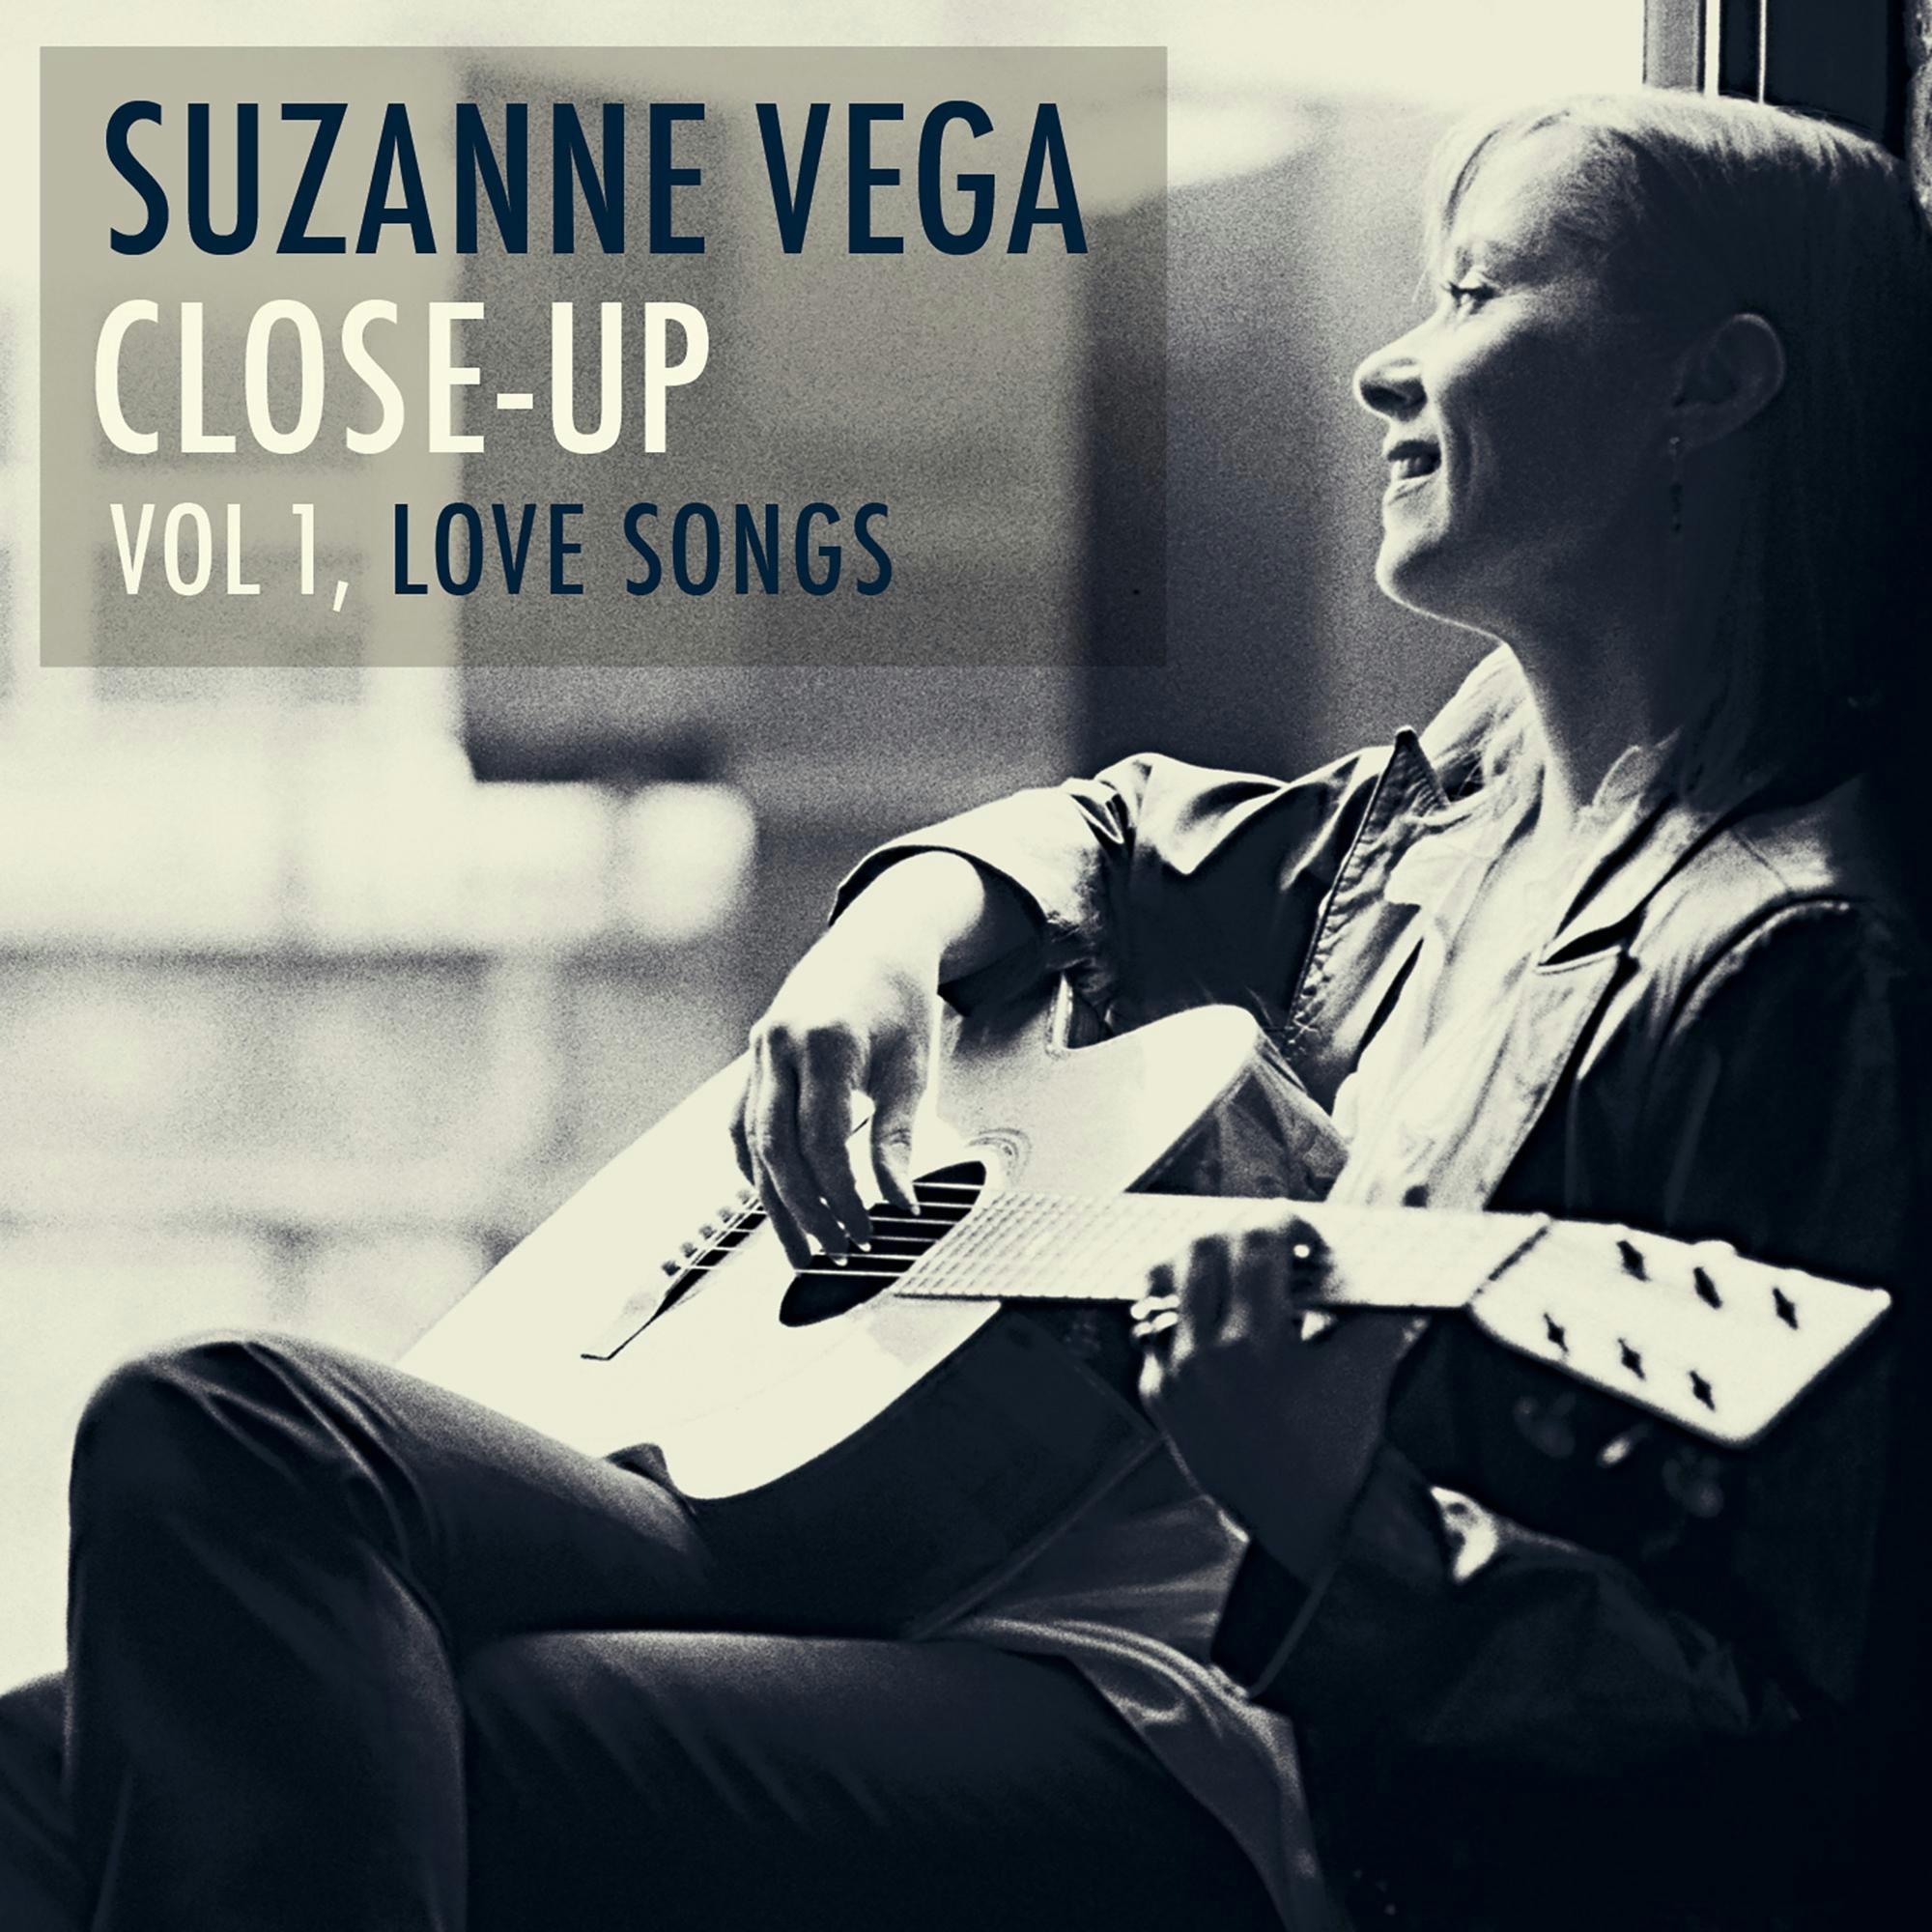 Album artwork for Album artwork for Close-Up Vol 1, Love Songs by Suzanne Vega by Close-Up Vol 1, Love Songs - Suzanne Vega